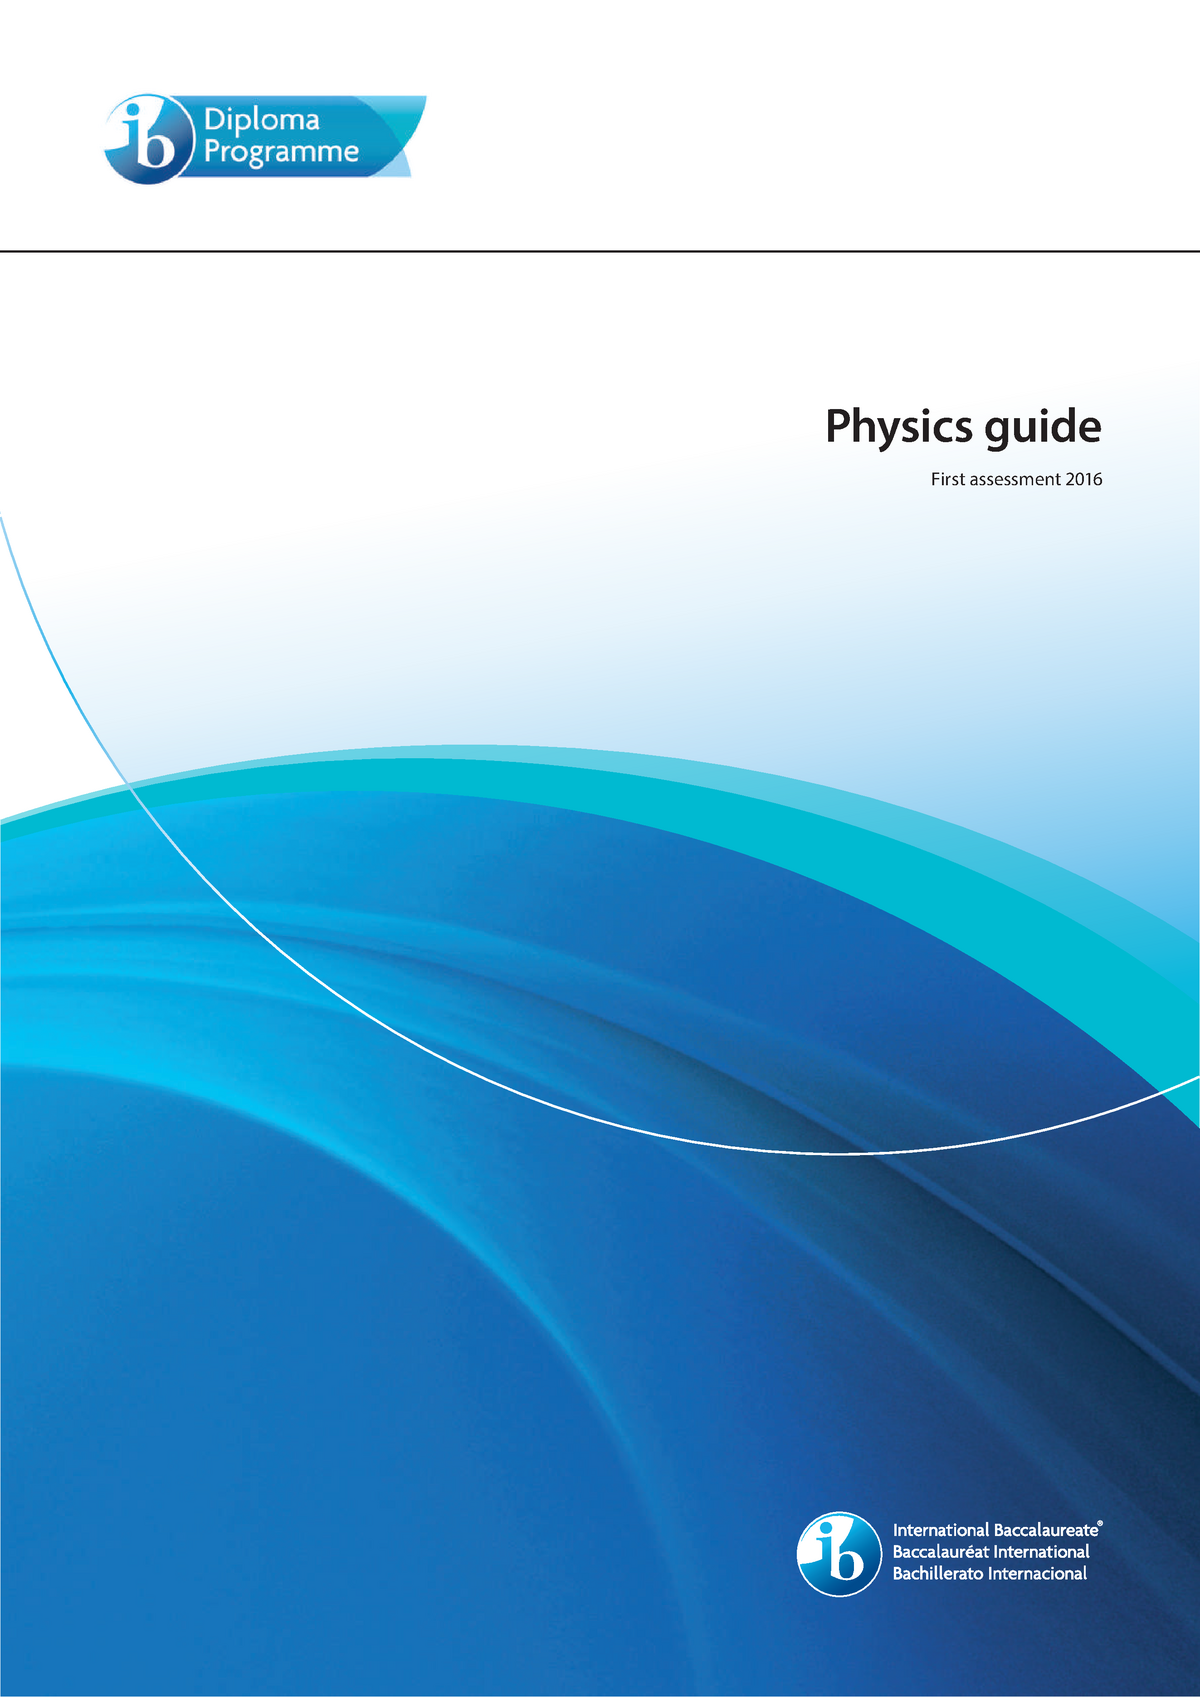 Physics guide for IB Physics guide First assessment 2016 Physics